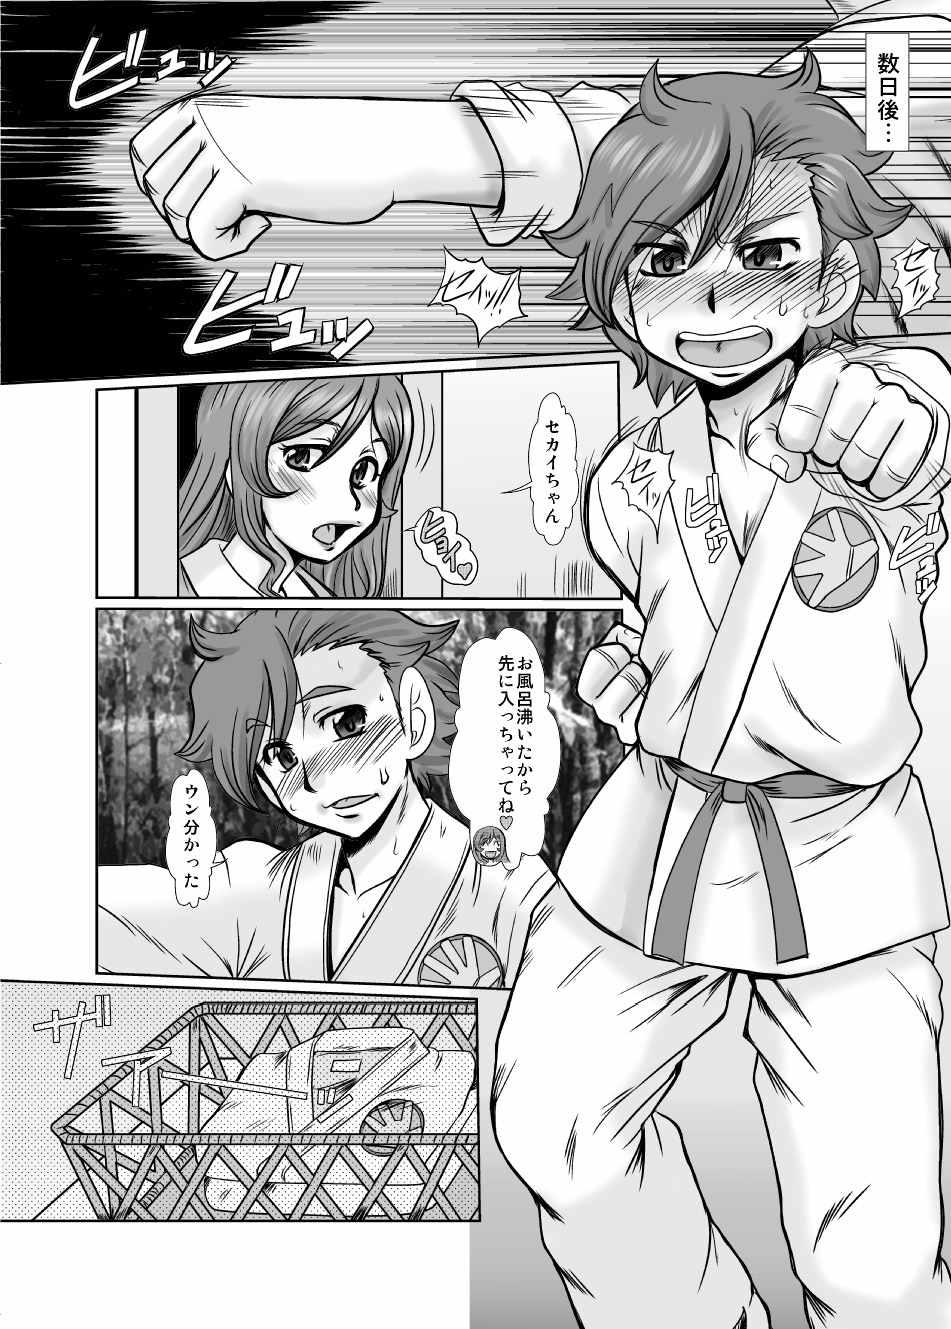 Mexican F-83 - Gundam build fighters try Party - Page 8